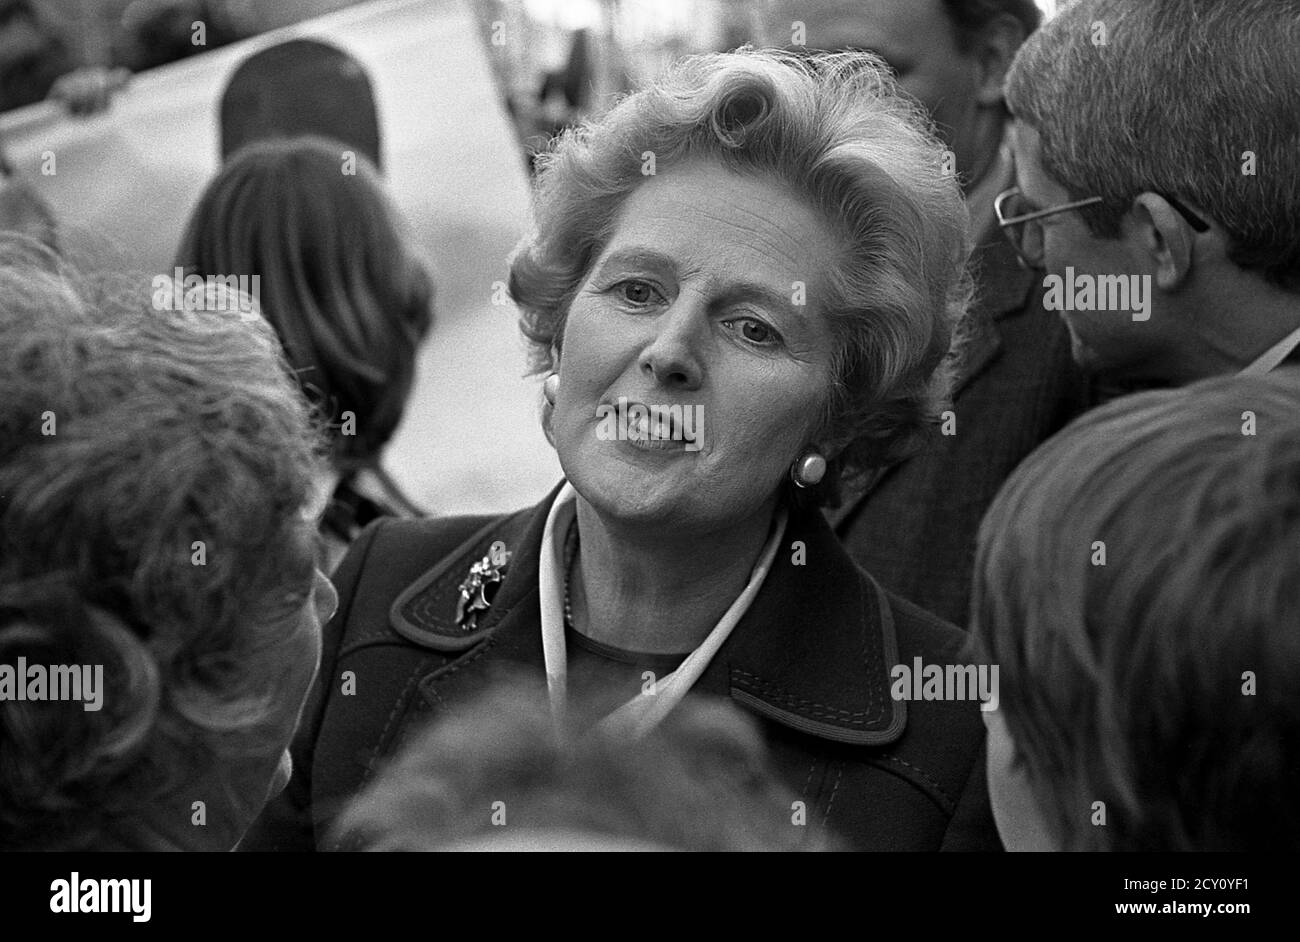 AJAXNETPHOTO.11TH FEBRUARY,1977. PORTSMOUTH, ENGLAND.  - CITY WALKABOUT - MRS MARGARET THATCHER (CON), LEADER OF THE OPPOSITION, ENGAGES WITH THE PUBLIC IN COMMERCIAL ROAD SHOPPING PRECINCT DURING A CAMPAIGN WALKABOUT. PHOTO:JONATHAN EASTLAND/AJAX REF:3771102 51 Stock Photo